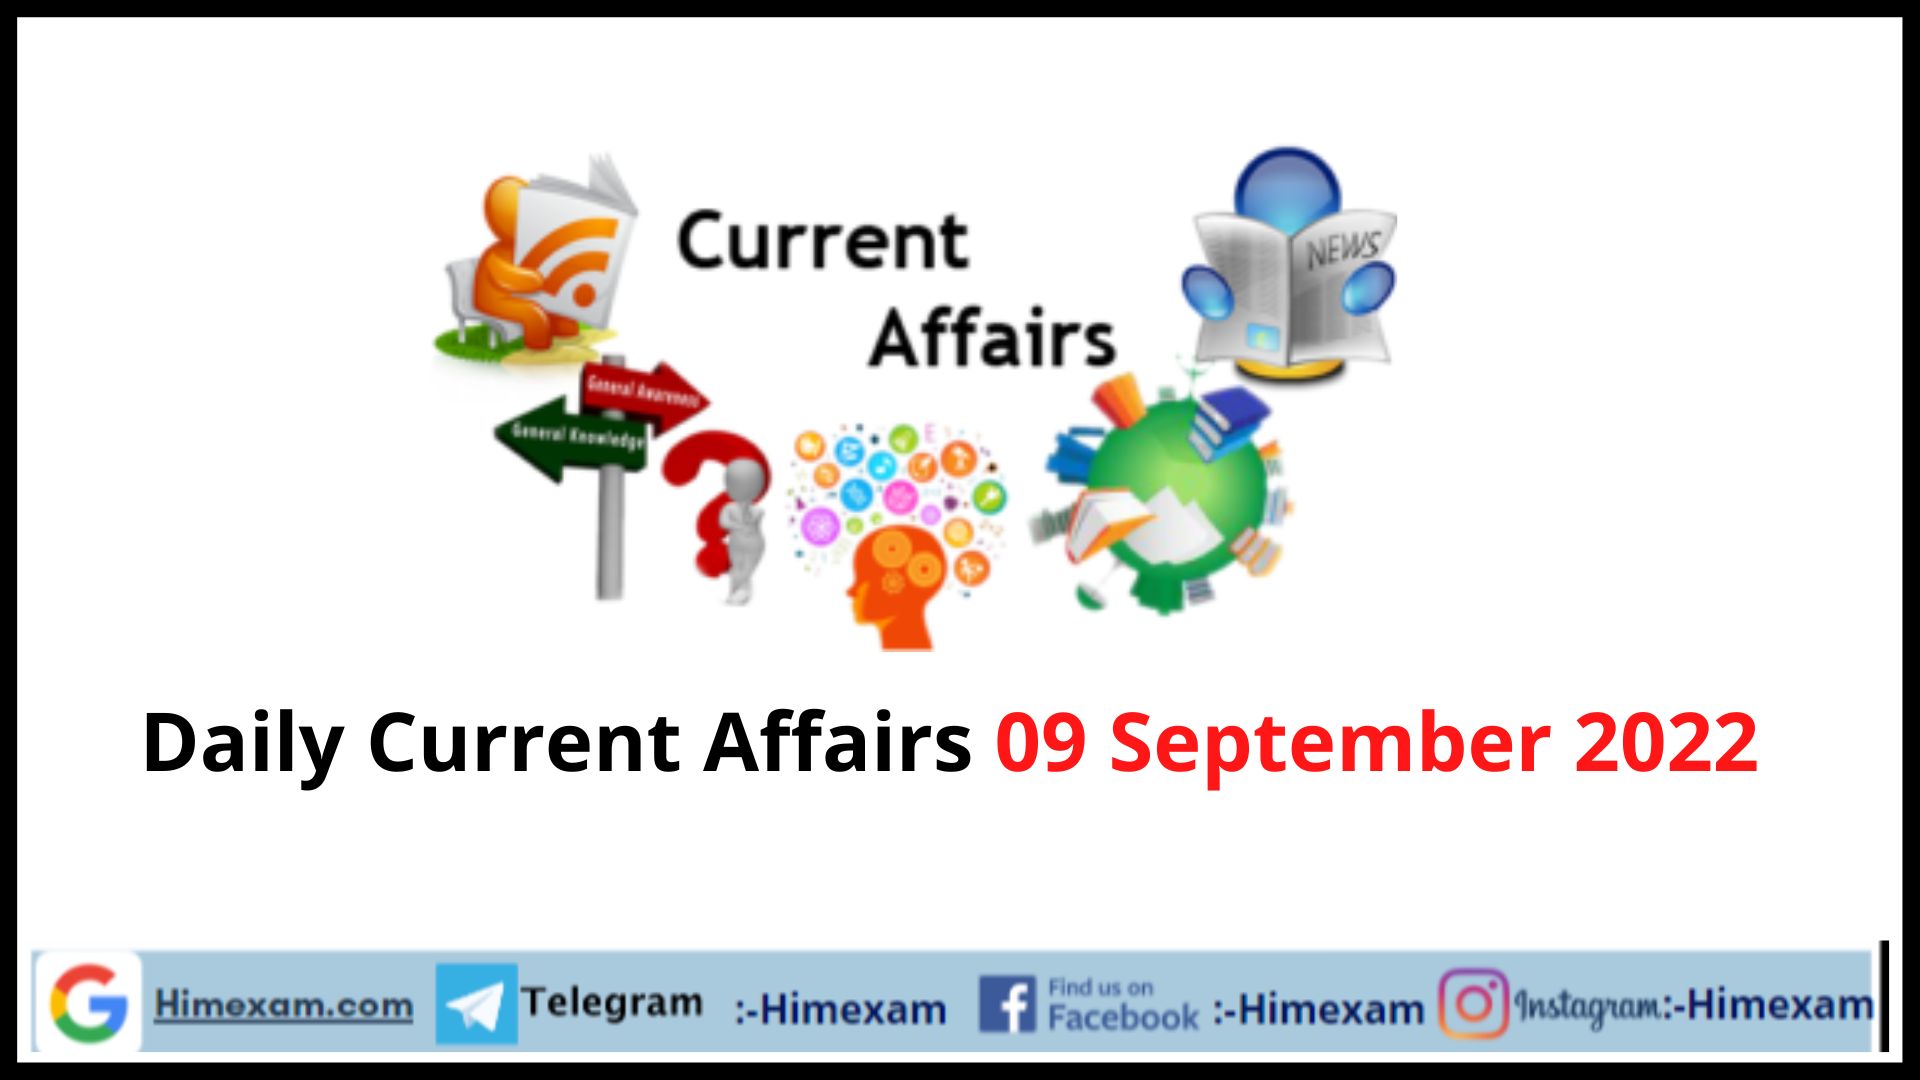 Daily Current Affairs 09 September 2022